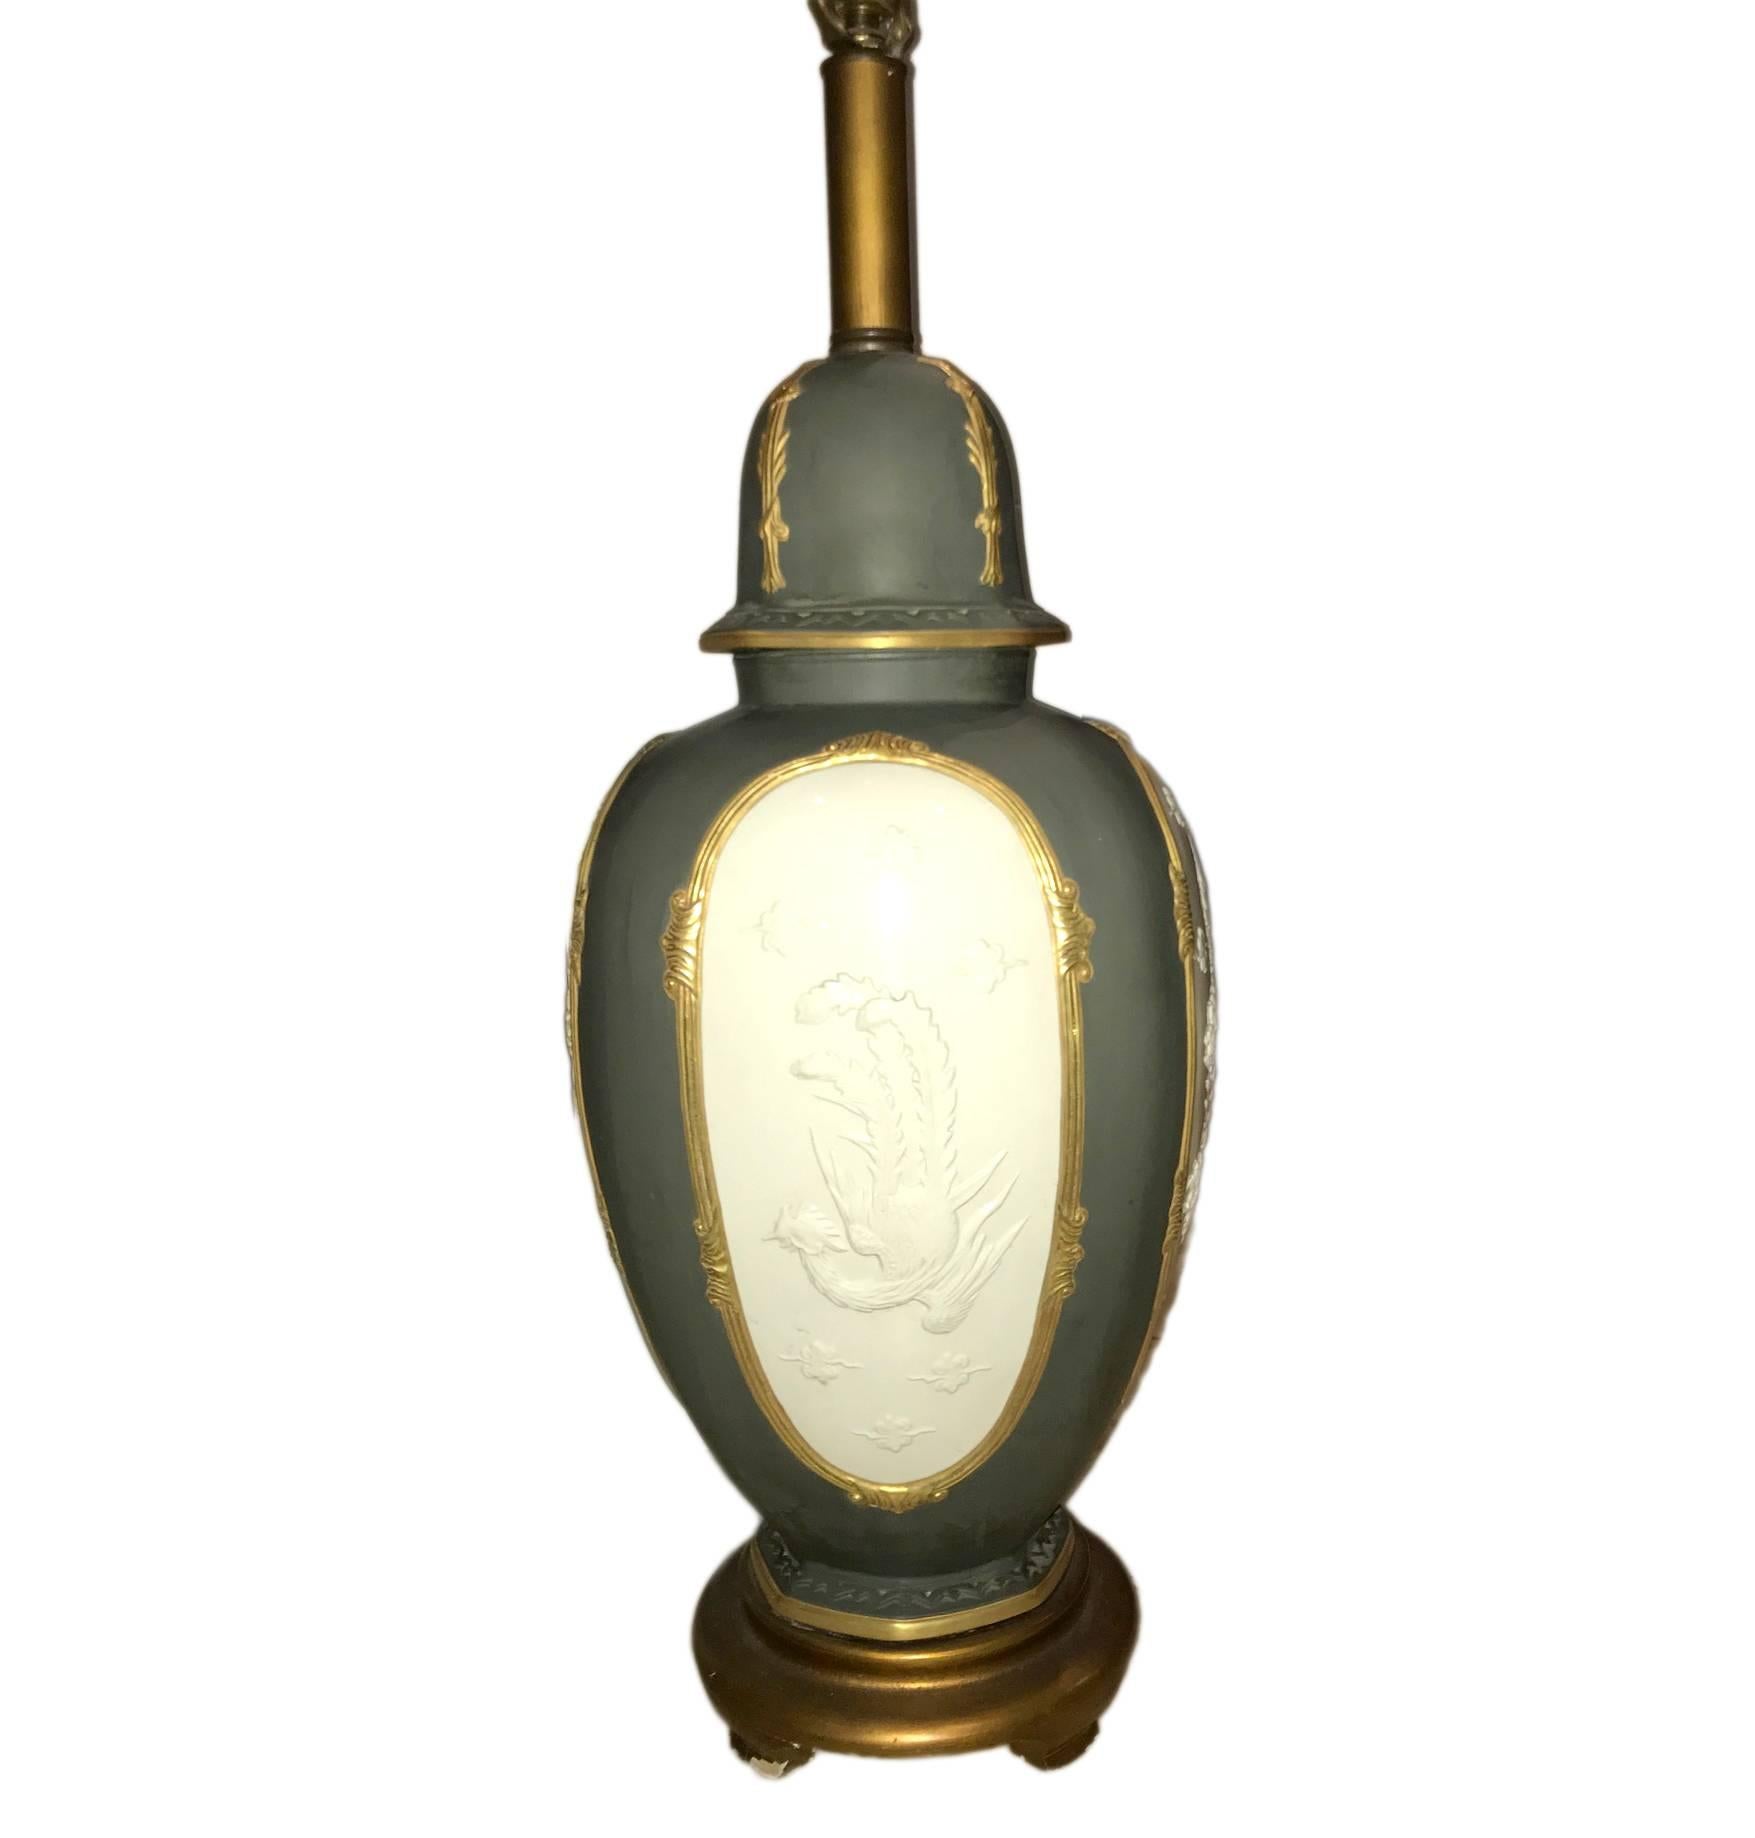 A large single French chinoiserie porcelain table lamp with gilt details and Chinese Dragon medallion decoration.

25